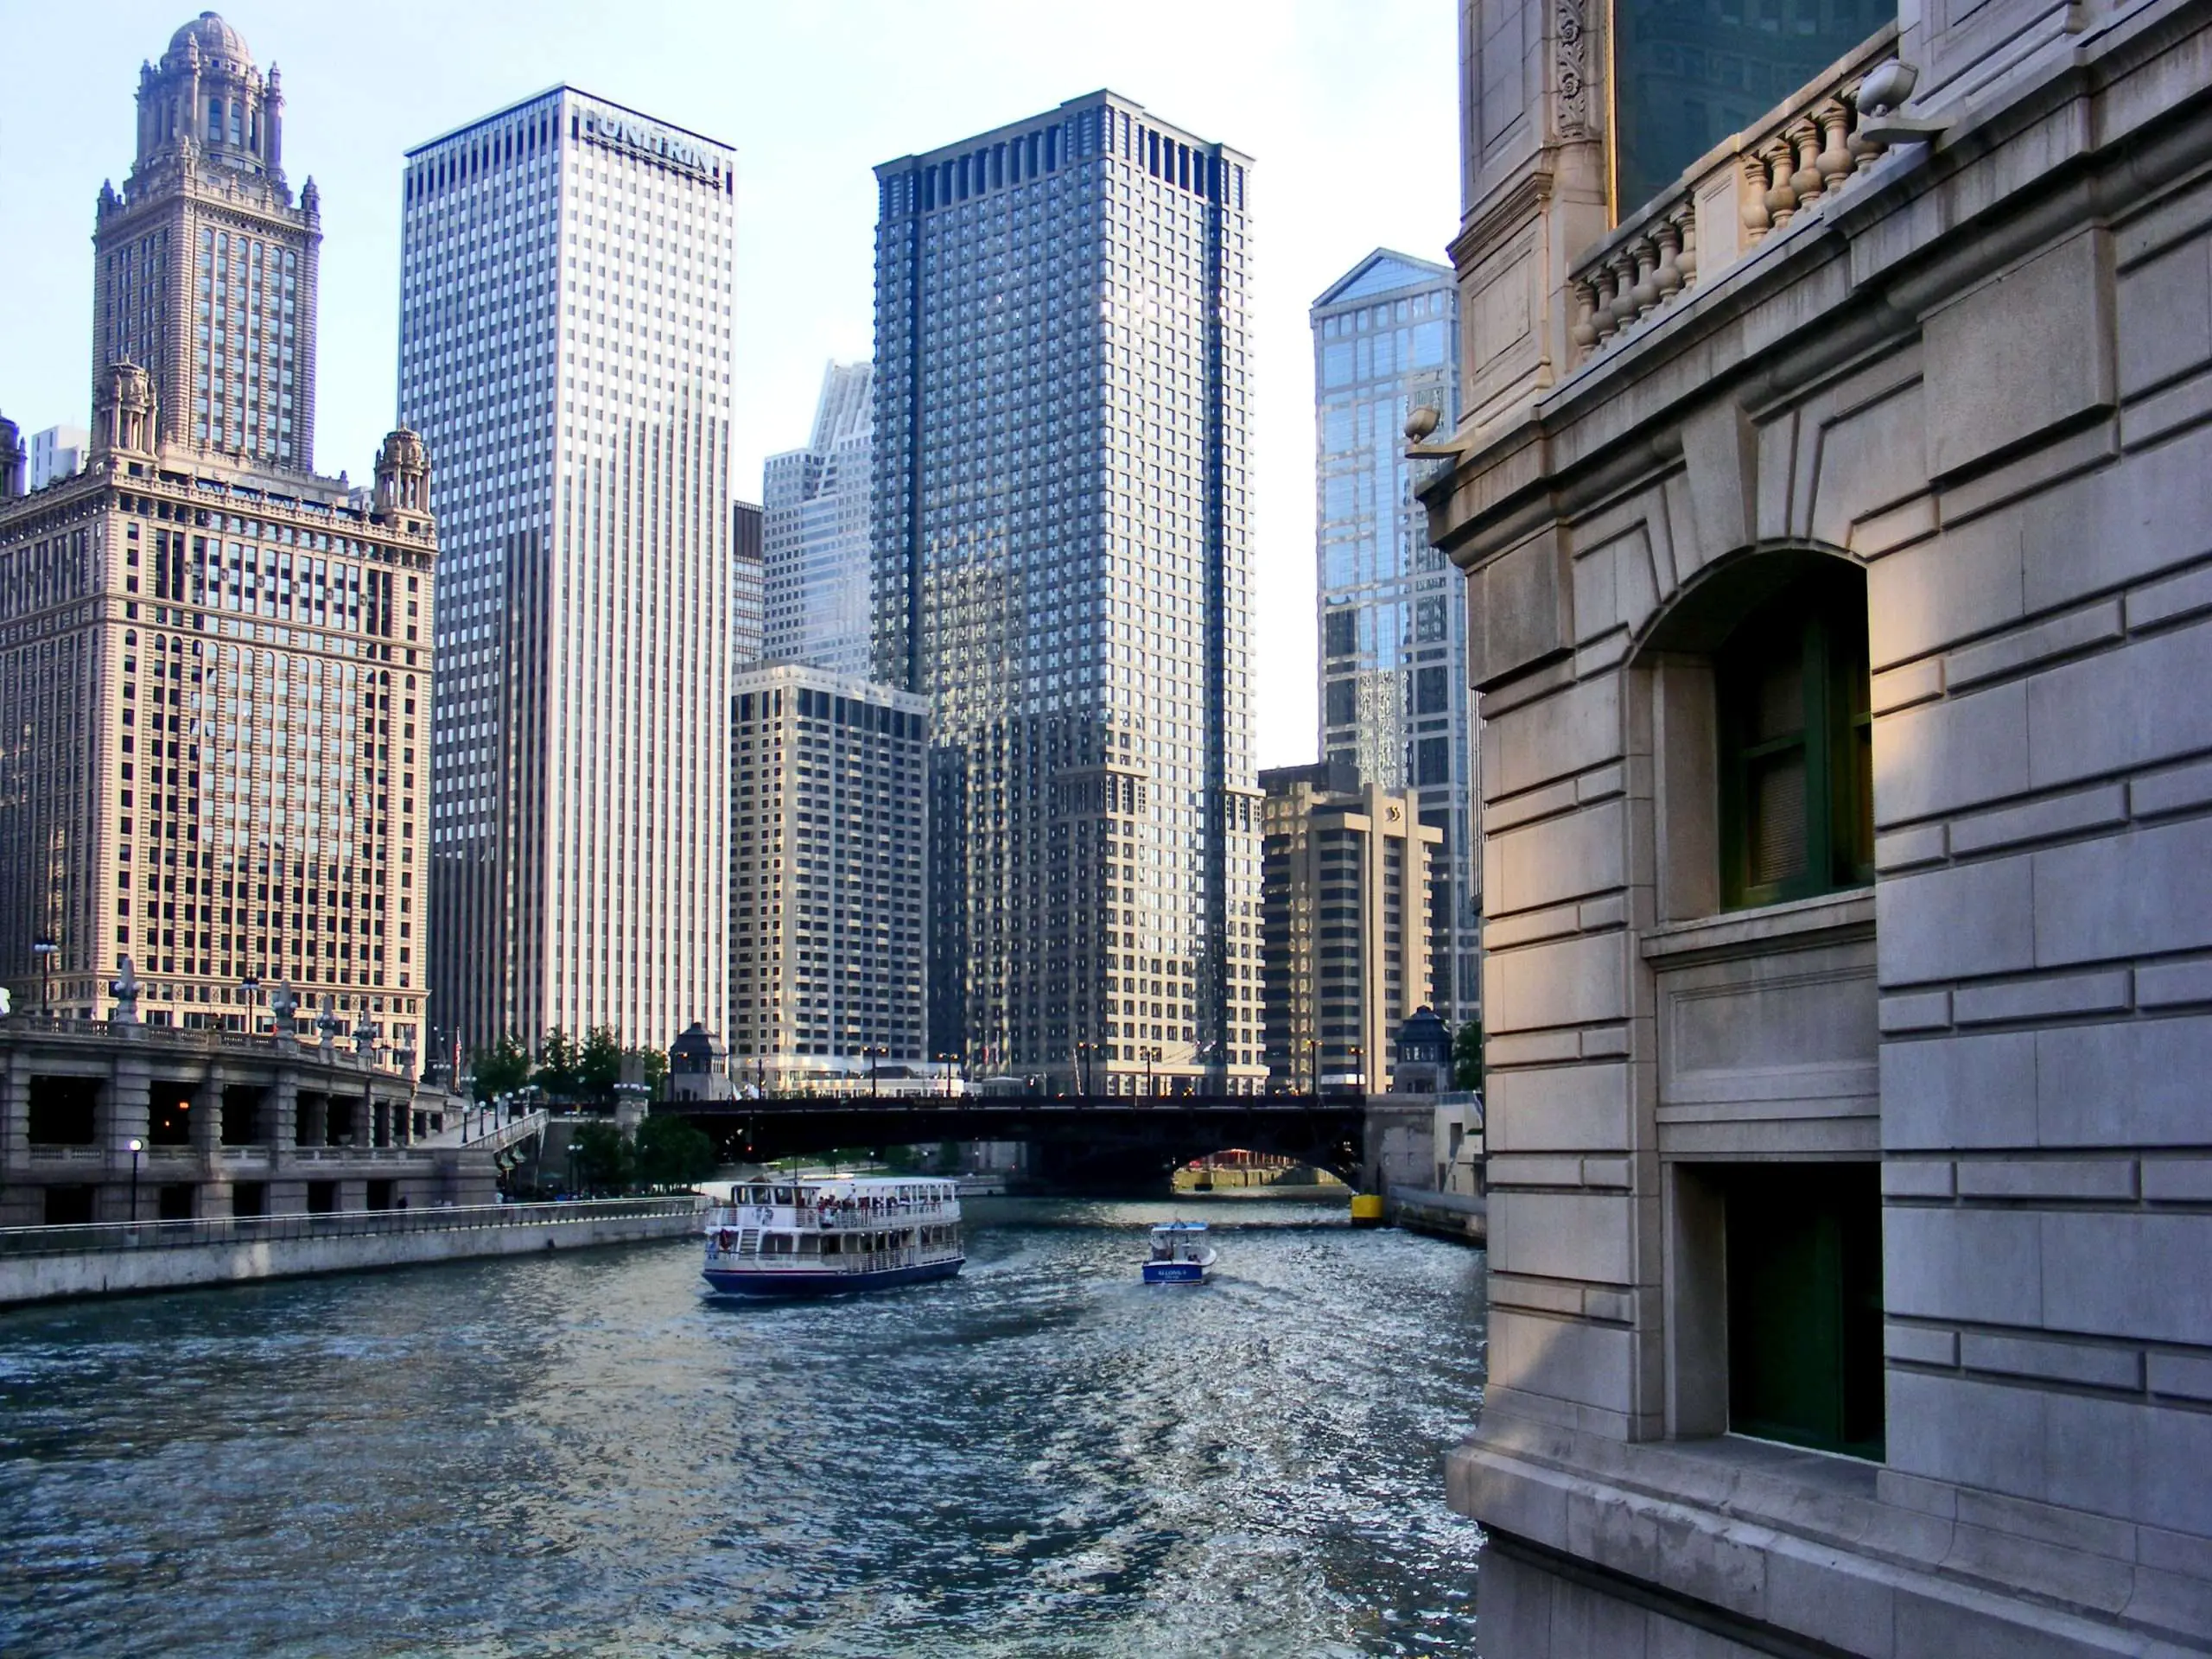 Architecture Boat Tour of Chicago Coupons and Review ...